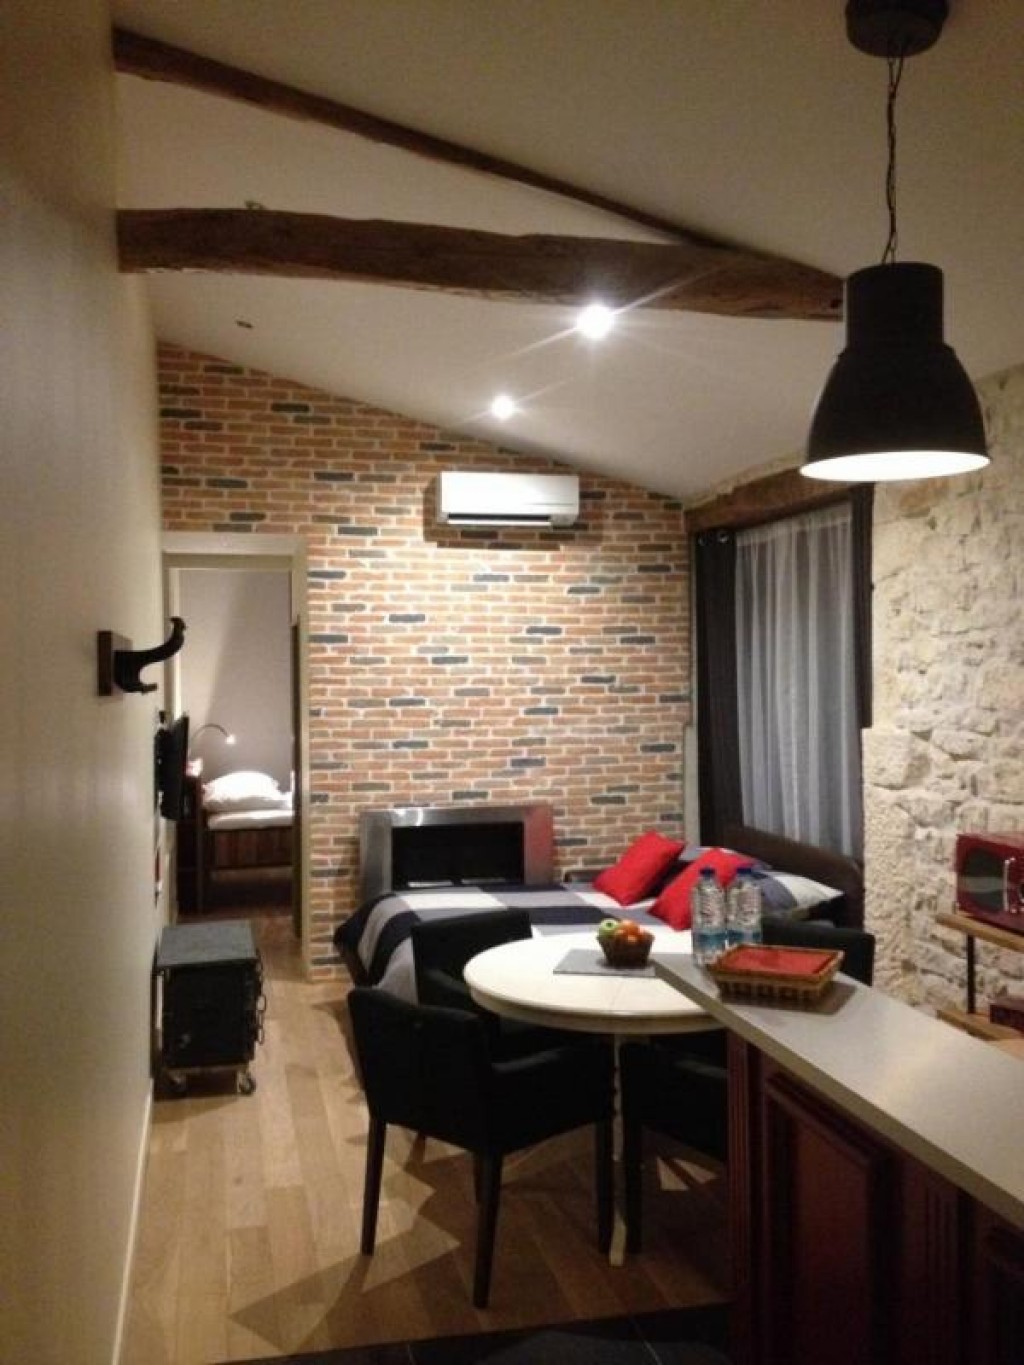 Images for Off season rental in France, Corcelles, Côte-d'Or EAID: BID:homefromhome